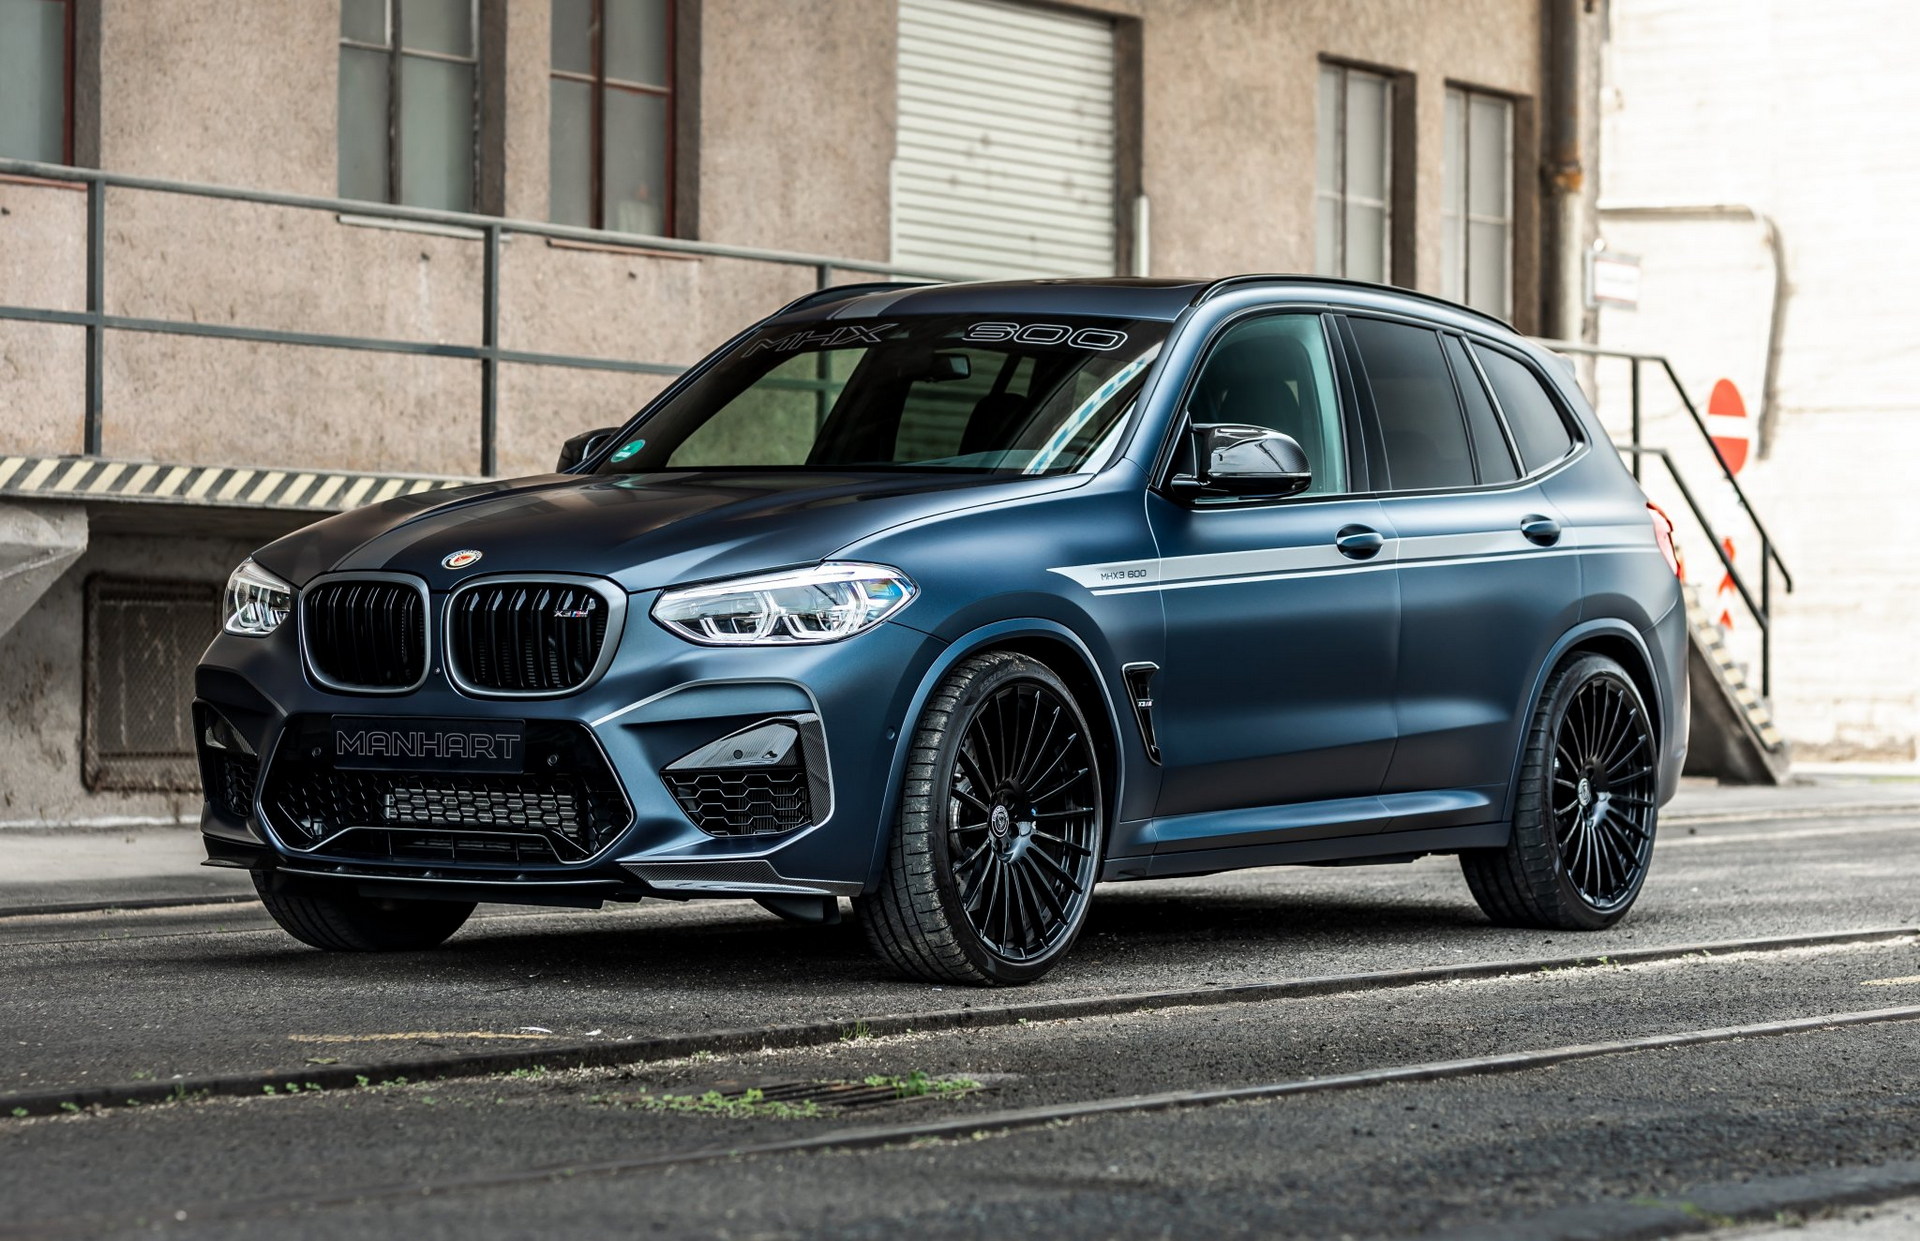 Manhart MHX3 600 Is A BeefedUp BMW X3 M Competition With 626 HP